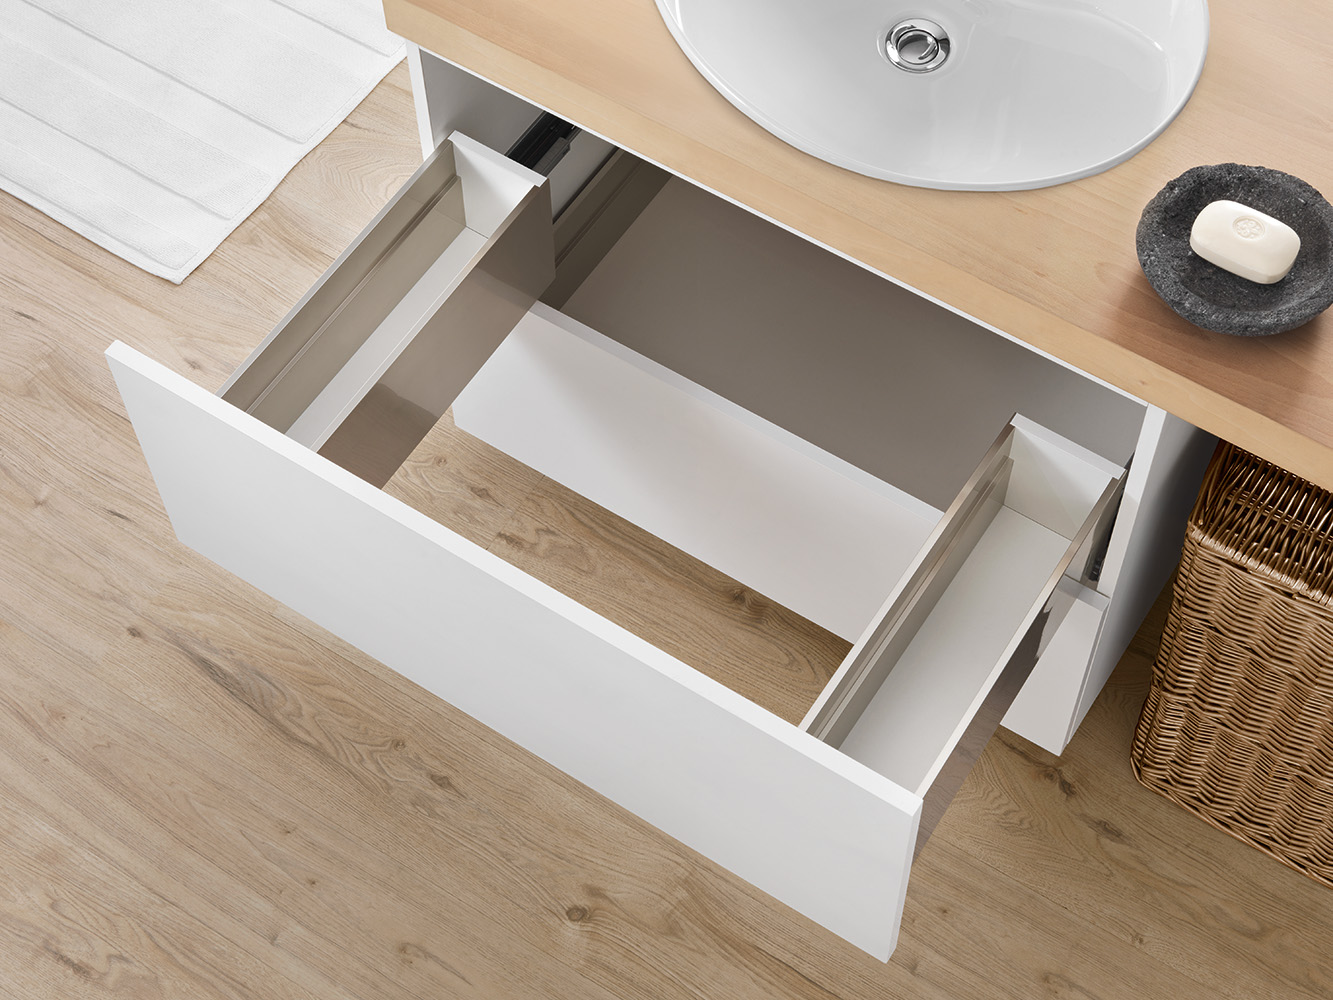 https://www.salice.com/media/immagini/5800_n_salice-metal-drawers-lineabox-under-sink-2-sided-double-notched-h178-IMG-H-02.jpg